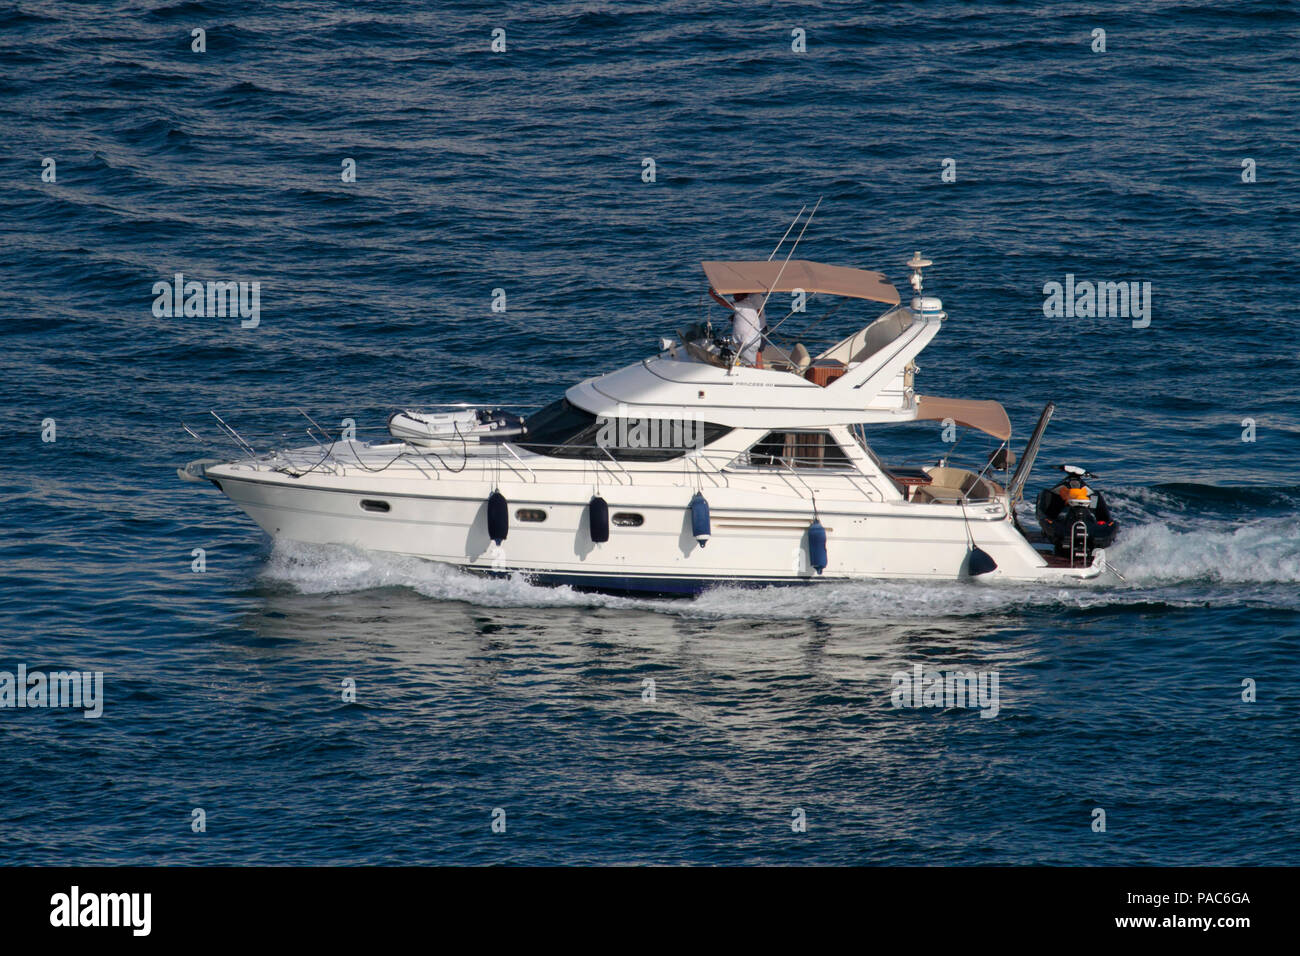 Princess 410 motor yacht with dinghy fore and jetski aft Stock Photo